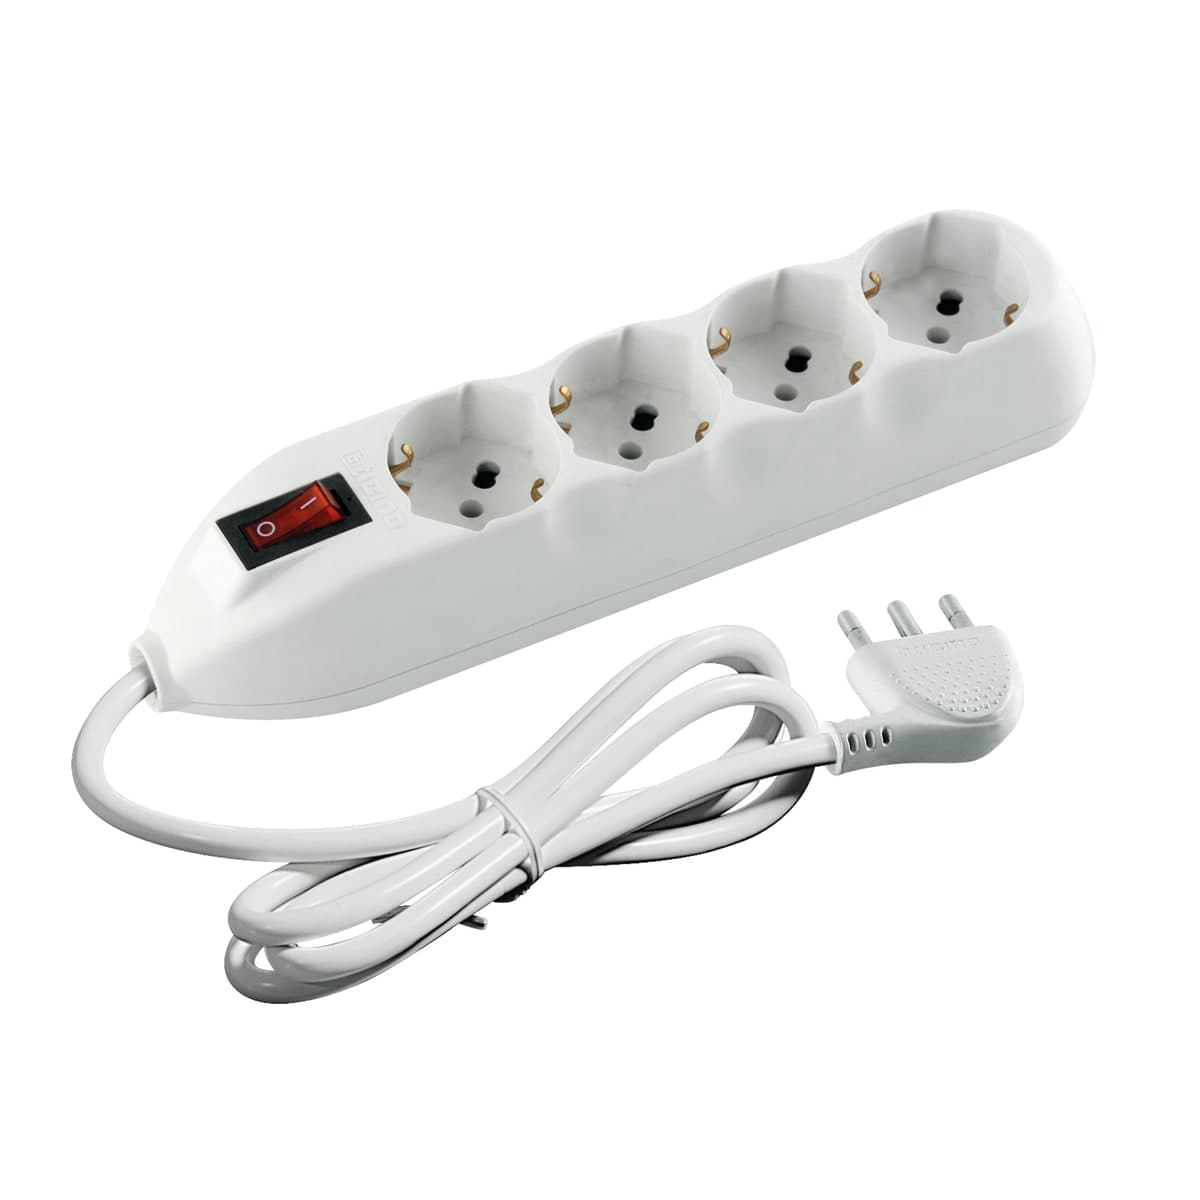 MULTIPRESA POKER 4 sockets with cable and safety switch - white